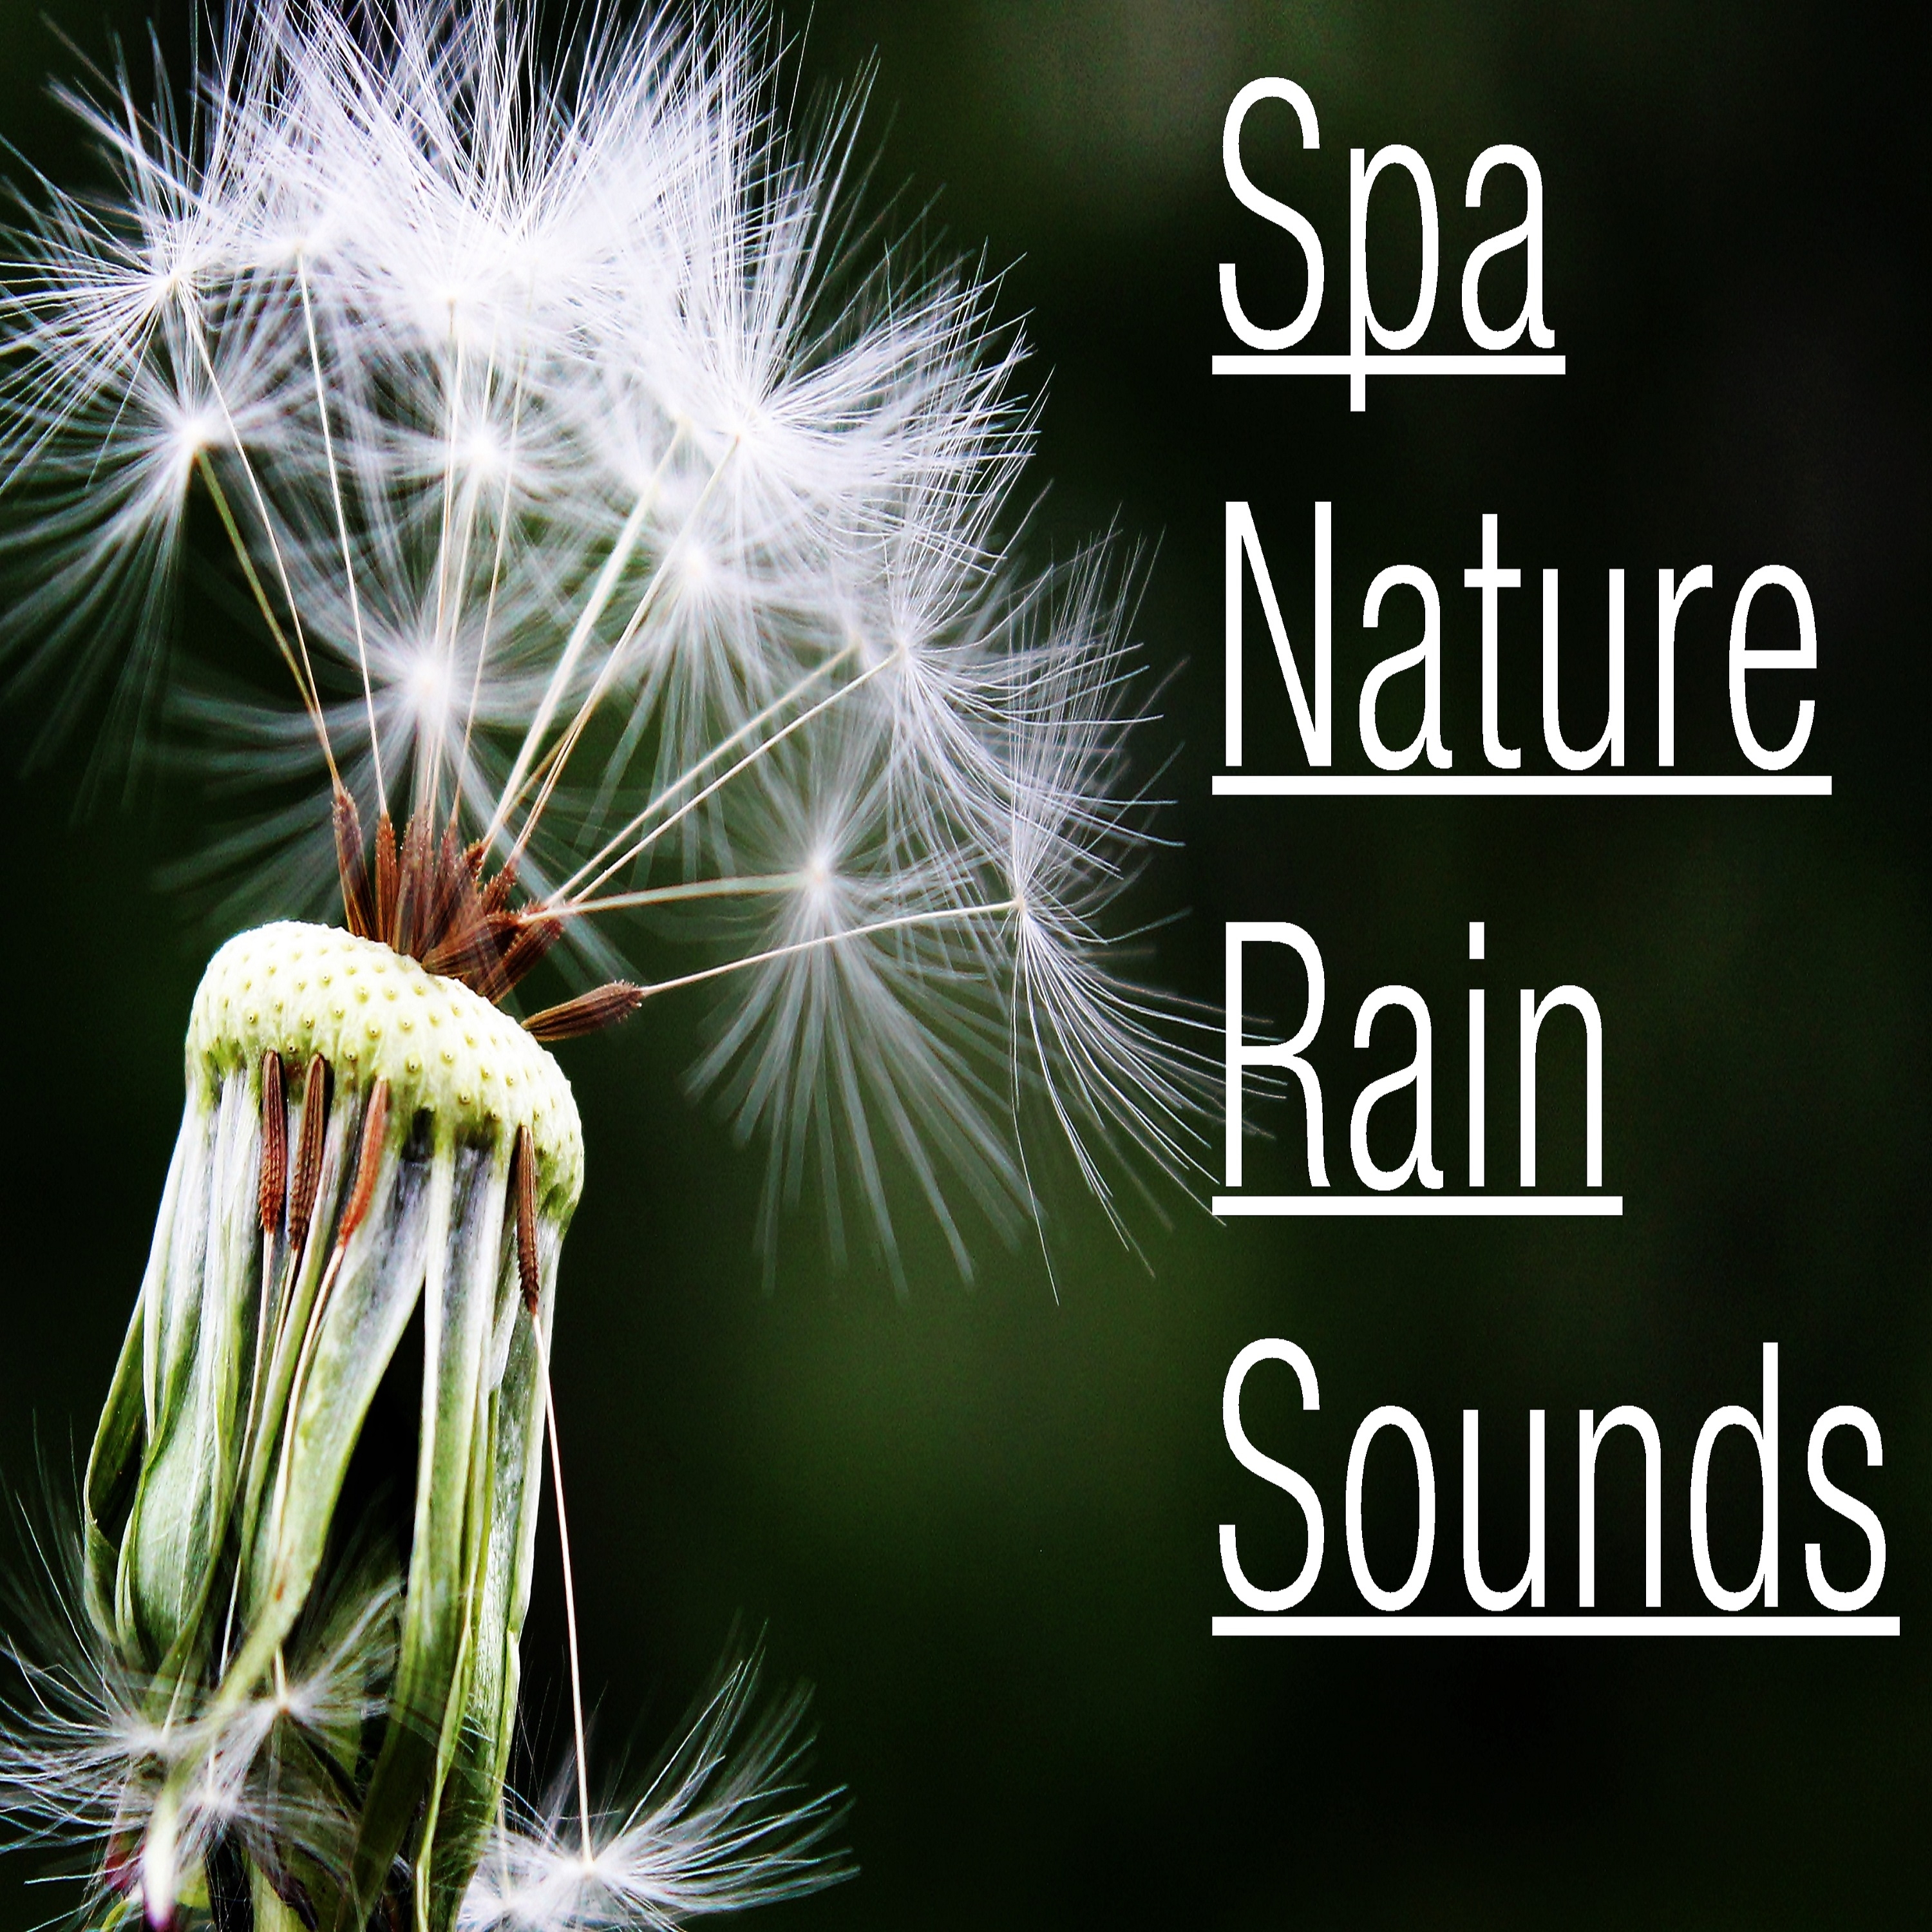 20 Spa Nature Rain Sounds - Relxation and Bliss